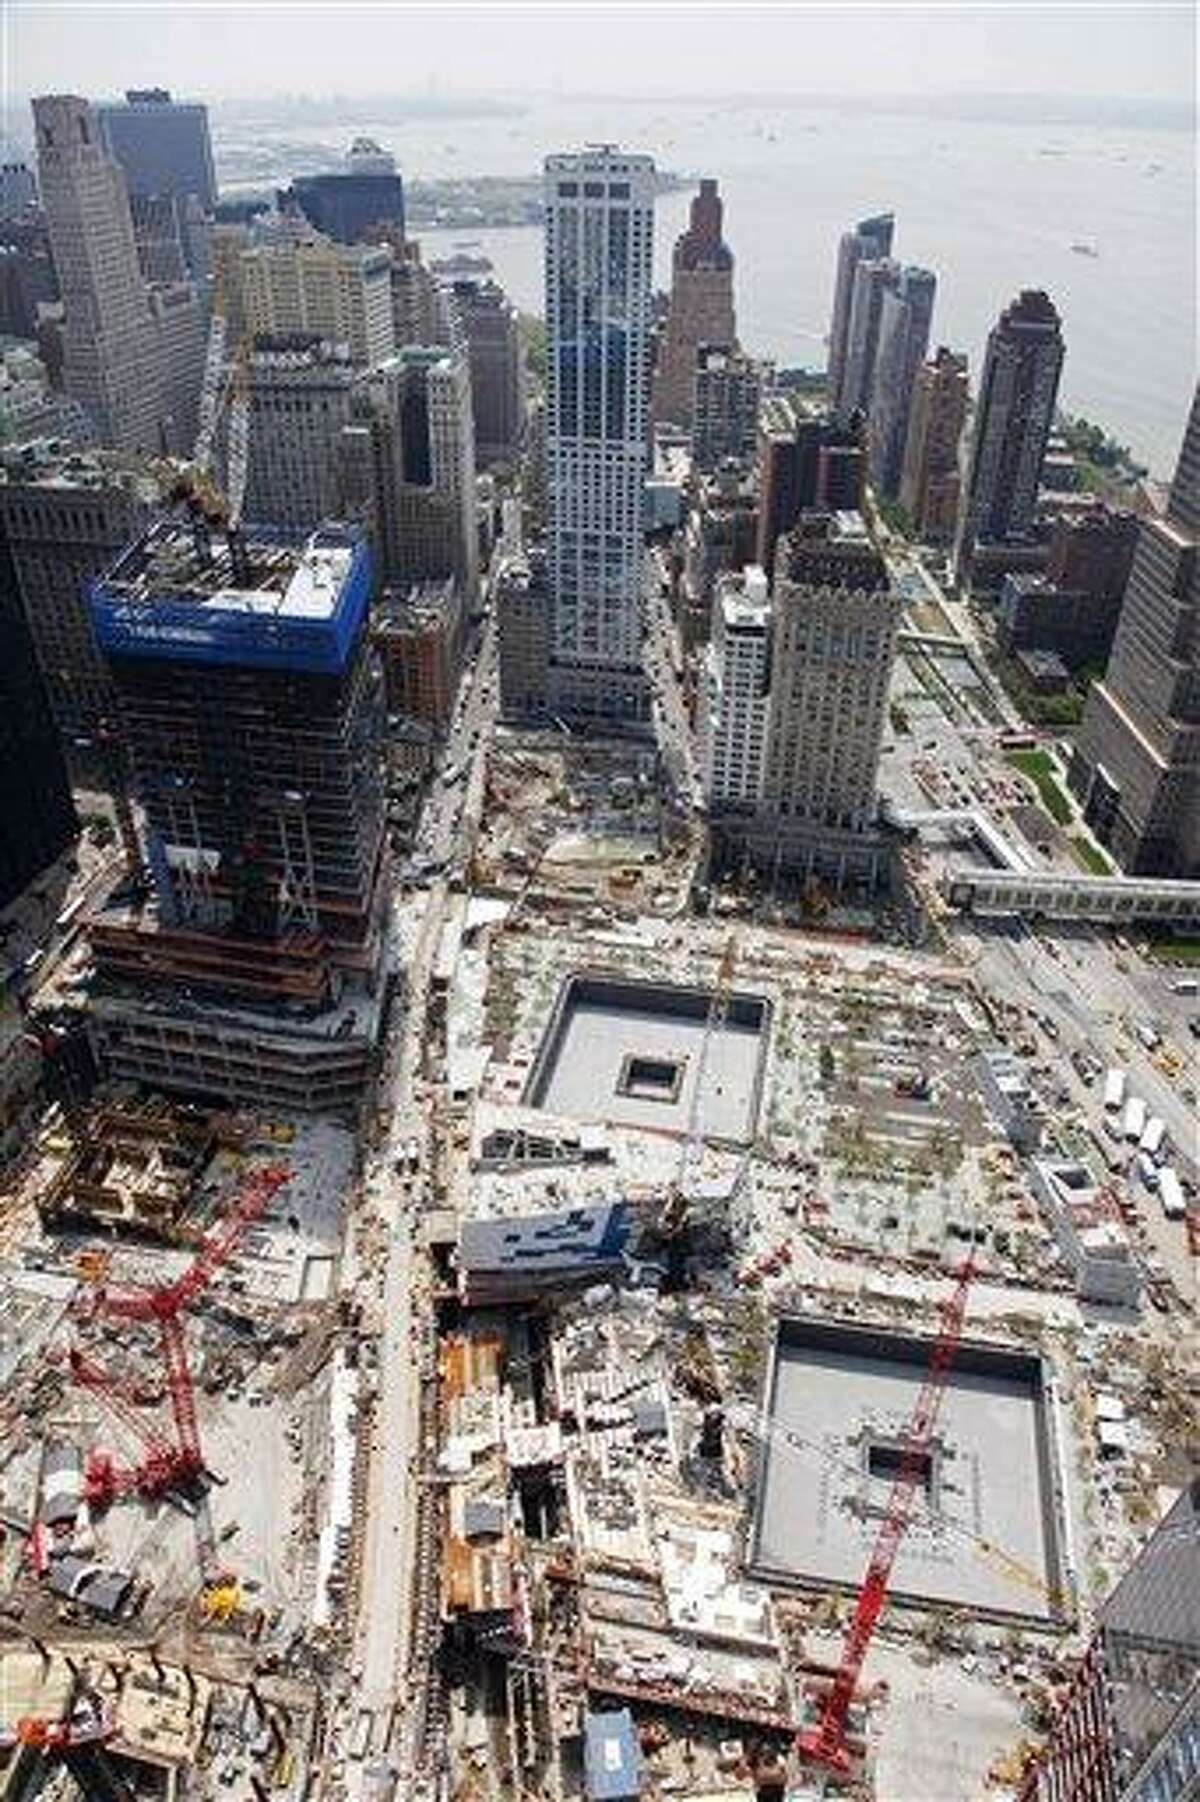 The National September 11 Memorial and Museum is under construction, lower right, Tuesday, May 3, 2011 at the World Trade Center site in New York. President Barack Obama will meet at the memorial Thursday with families of victims of the September 11, 2001 attacks following the death of Osama bin Laden on Sunday in Pakistan. The memorial is scheduled to open to the public in time for the tenth anniversary to be held Sept. 11, 2011. (AP Photo/Mark Lennihan)